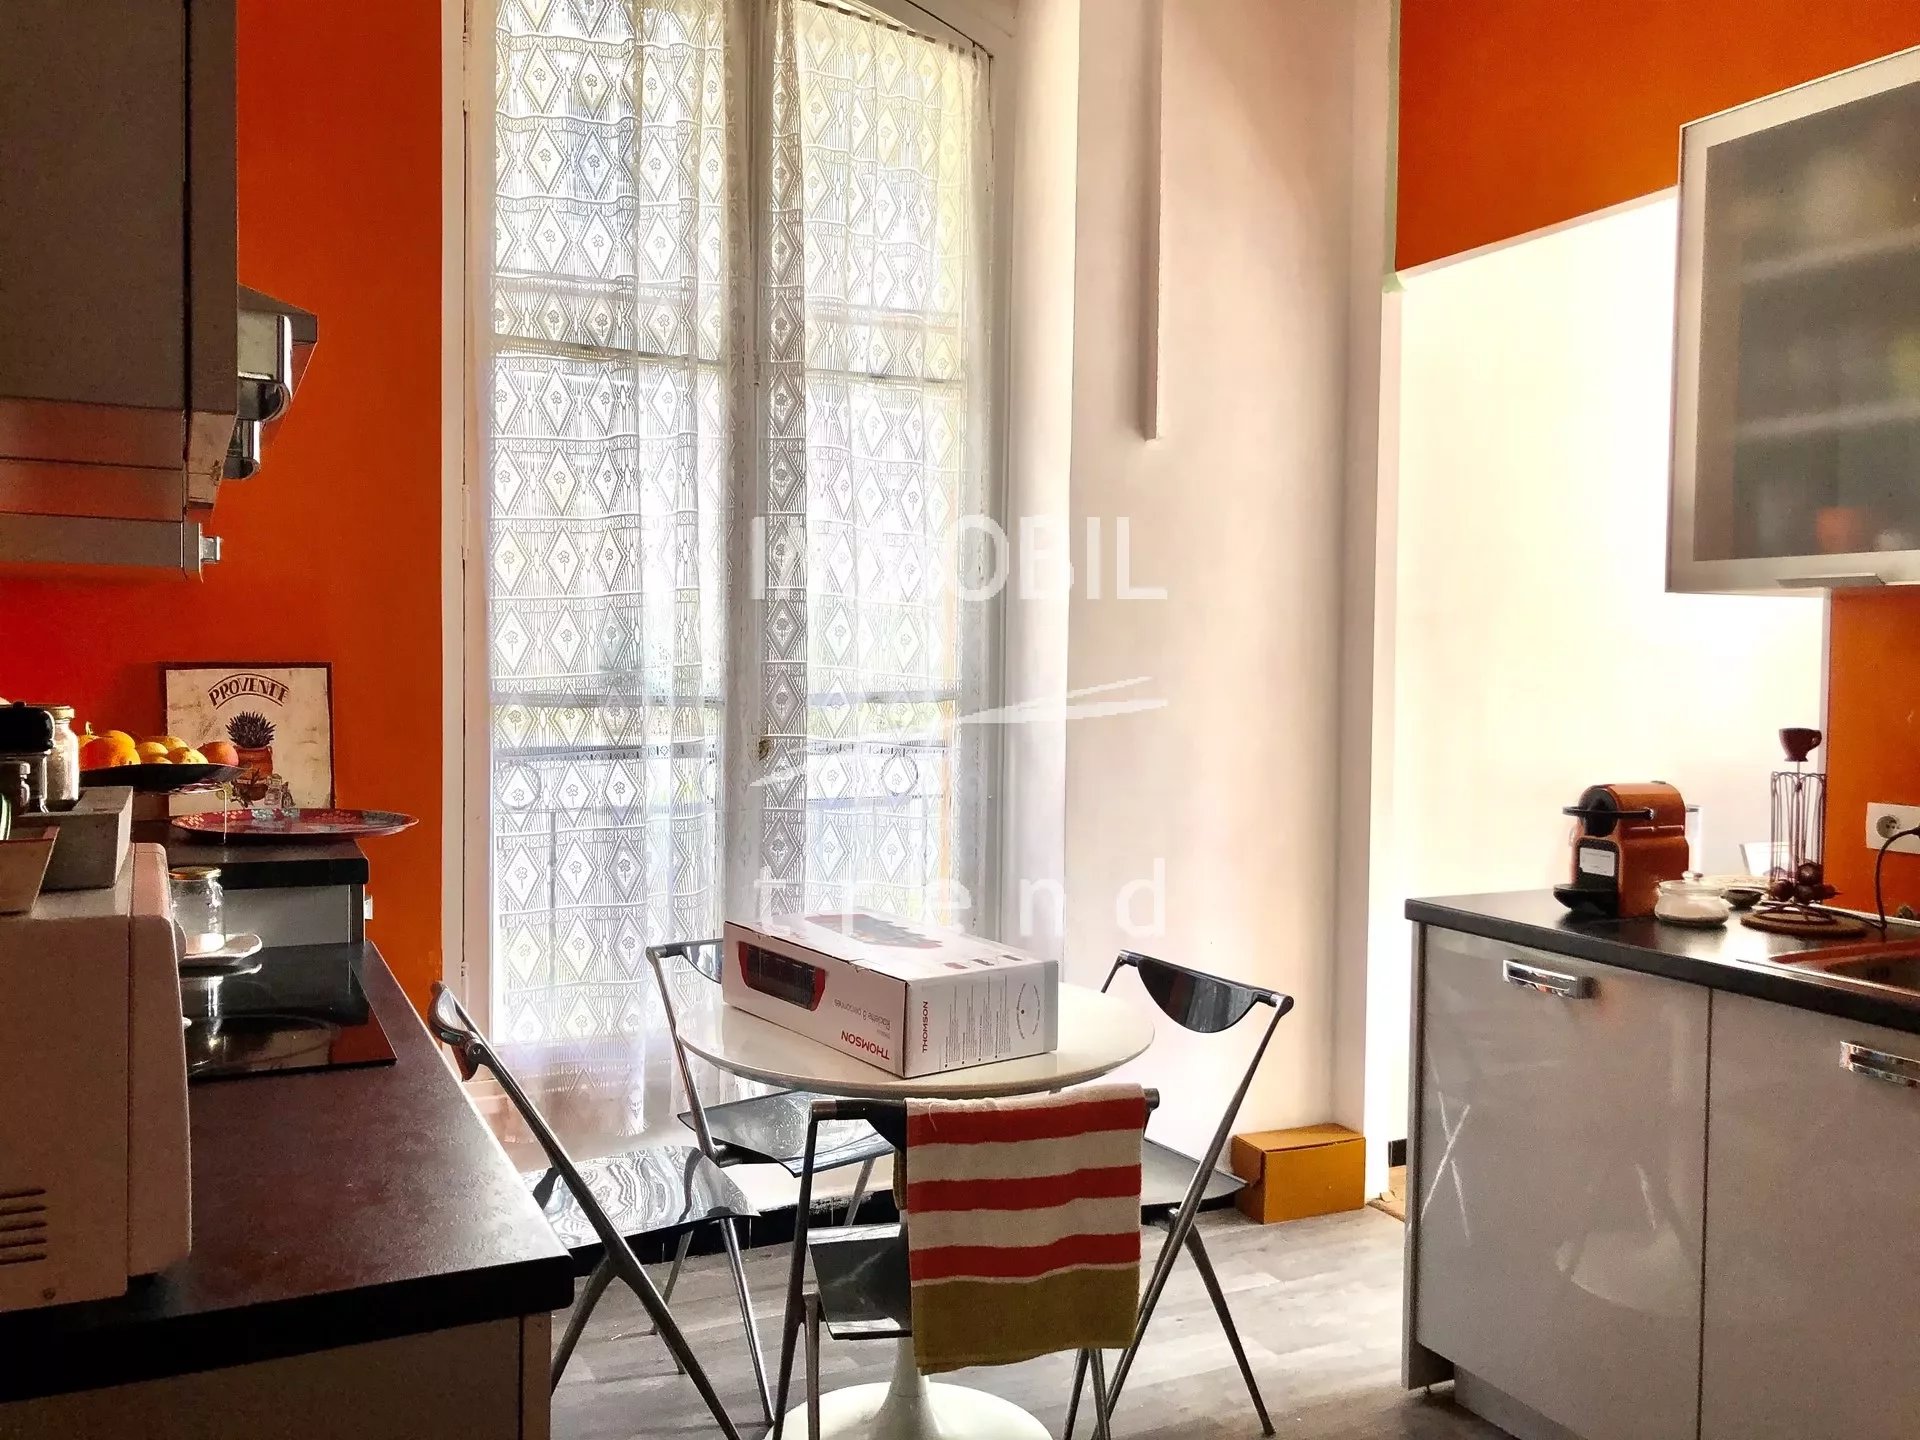 MENTON NEAR TOWN AND STATION 3 ROOMS IN HOUSE MENTONNAISE